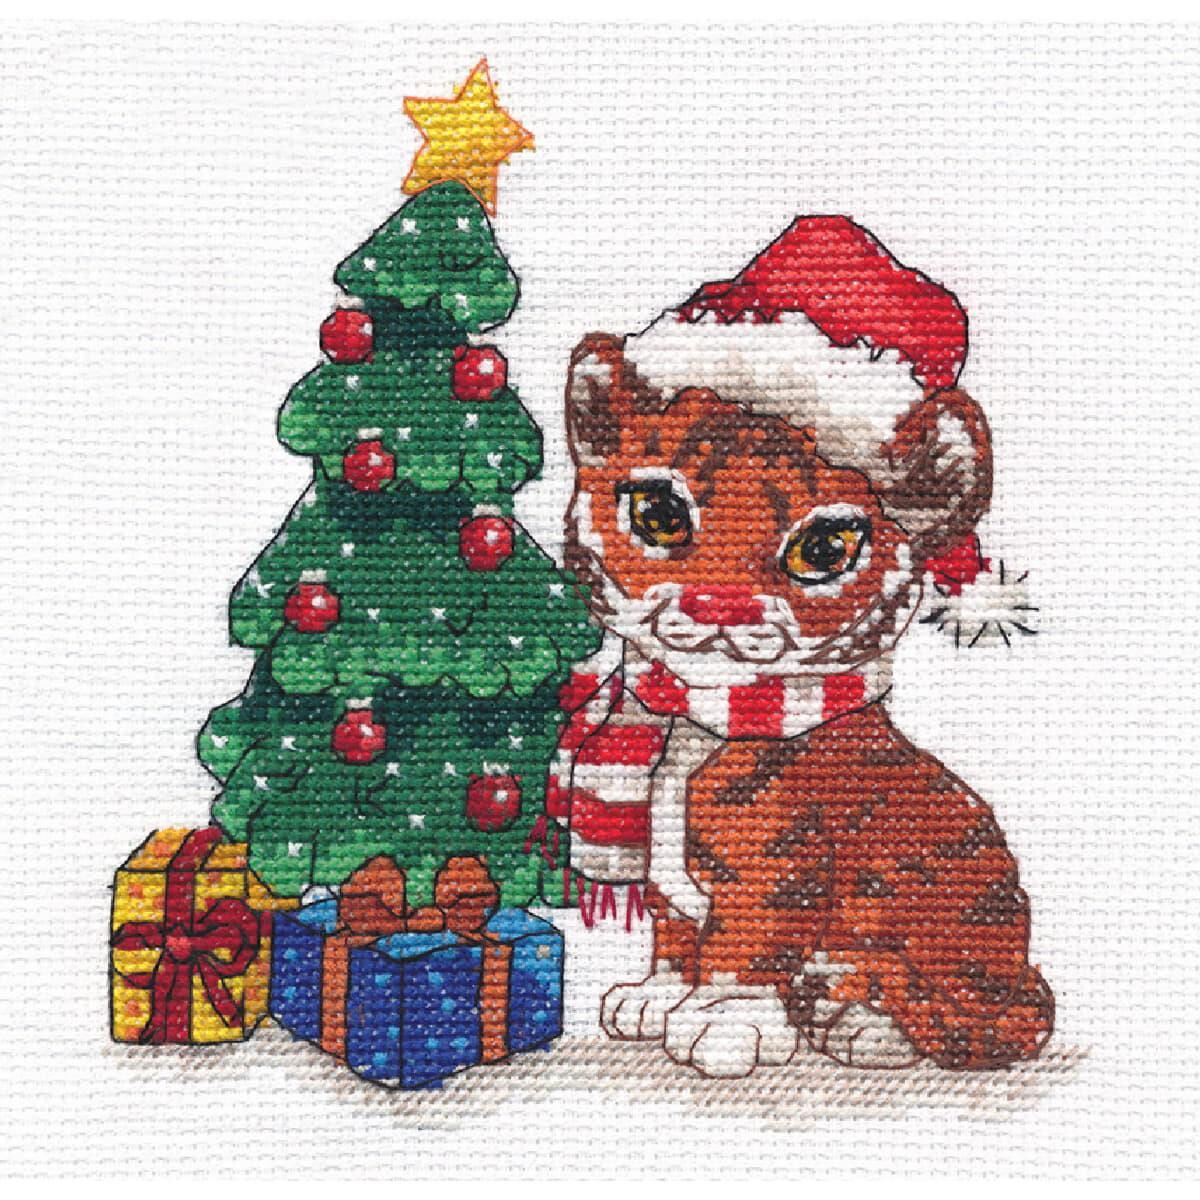 Oven counted cross stitch kit "Christmas...